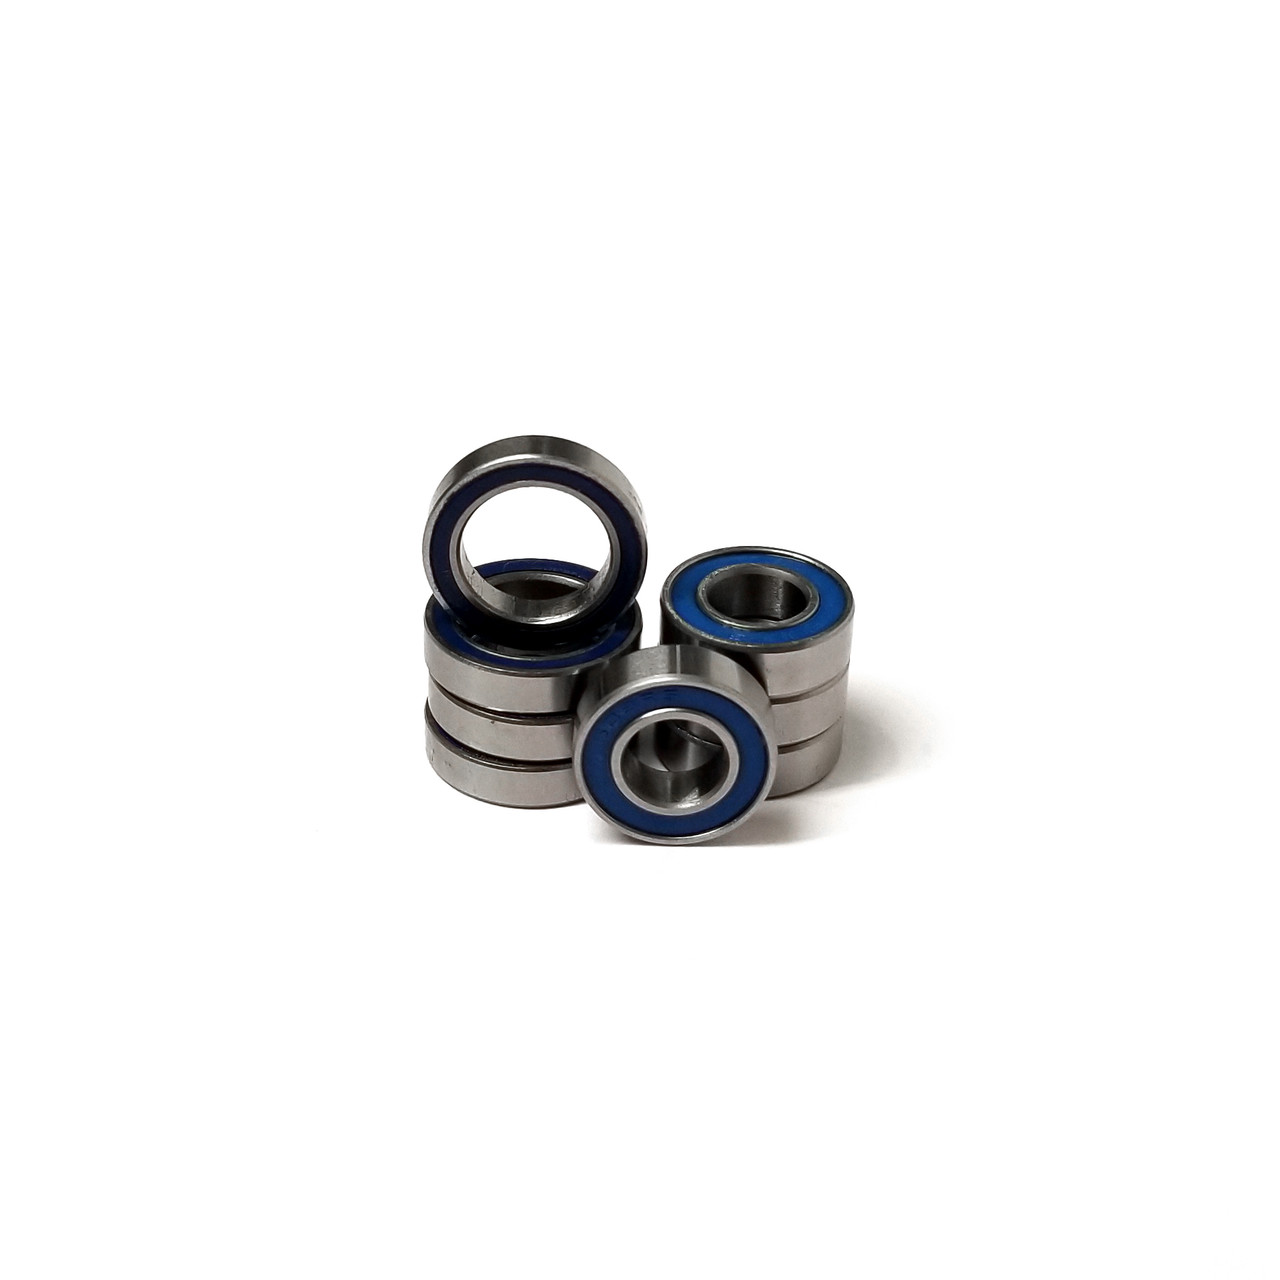 For Traxxas MAXX 4S 10th Scale Blue Rubber sealed wheel bearings.  For use with the Traxxas brand Steel CV Shields part no. 8950X only.     Includes 4-8x16x5 mm and 4-17x23x4 mm Bearings.